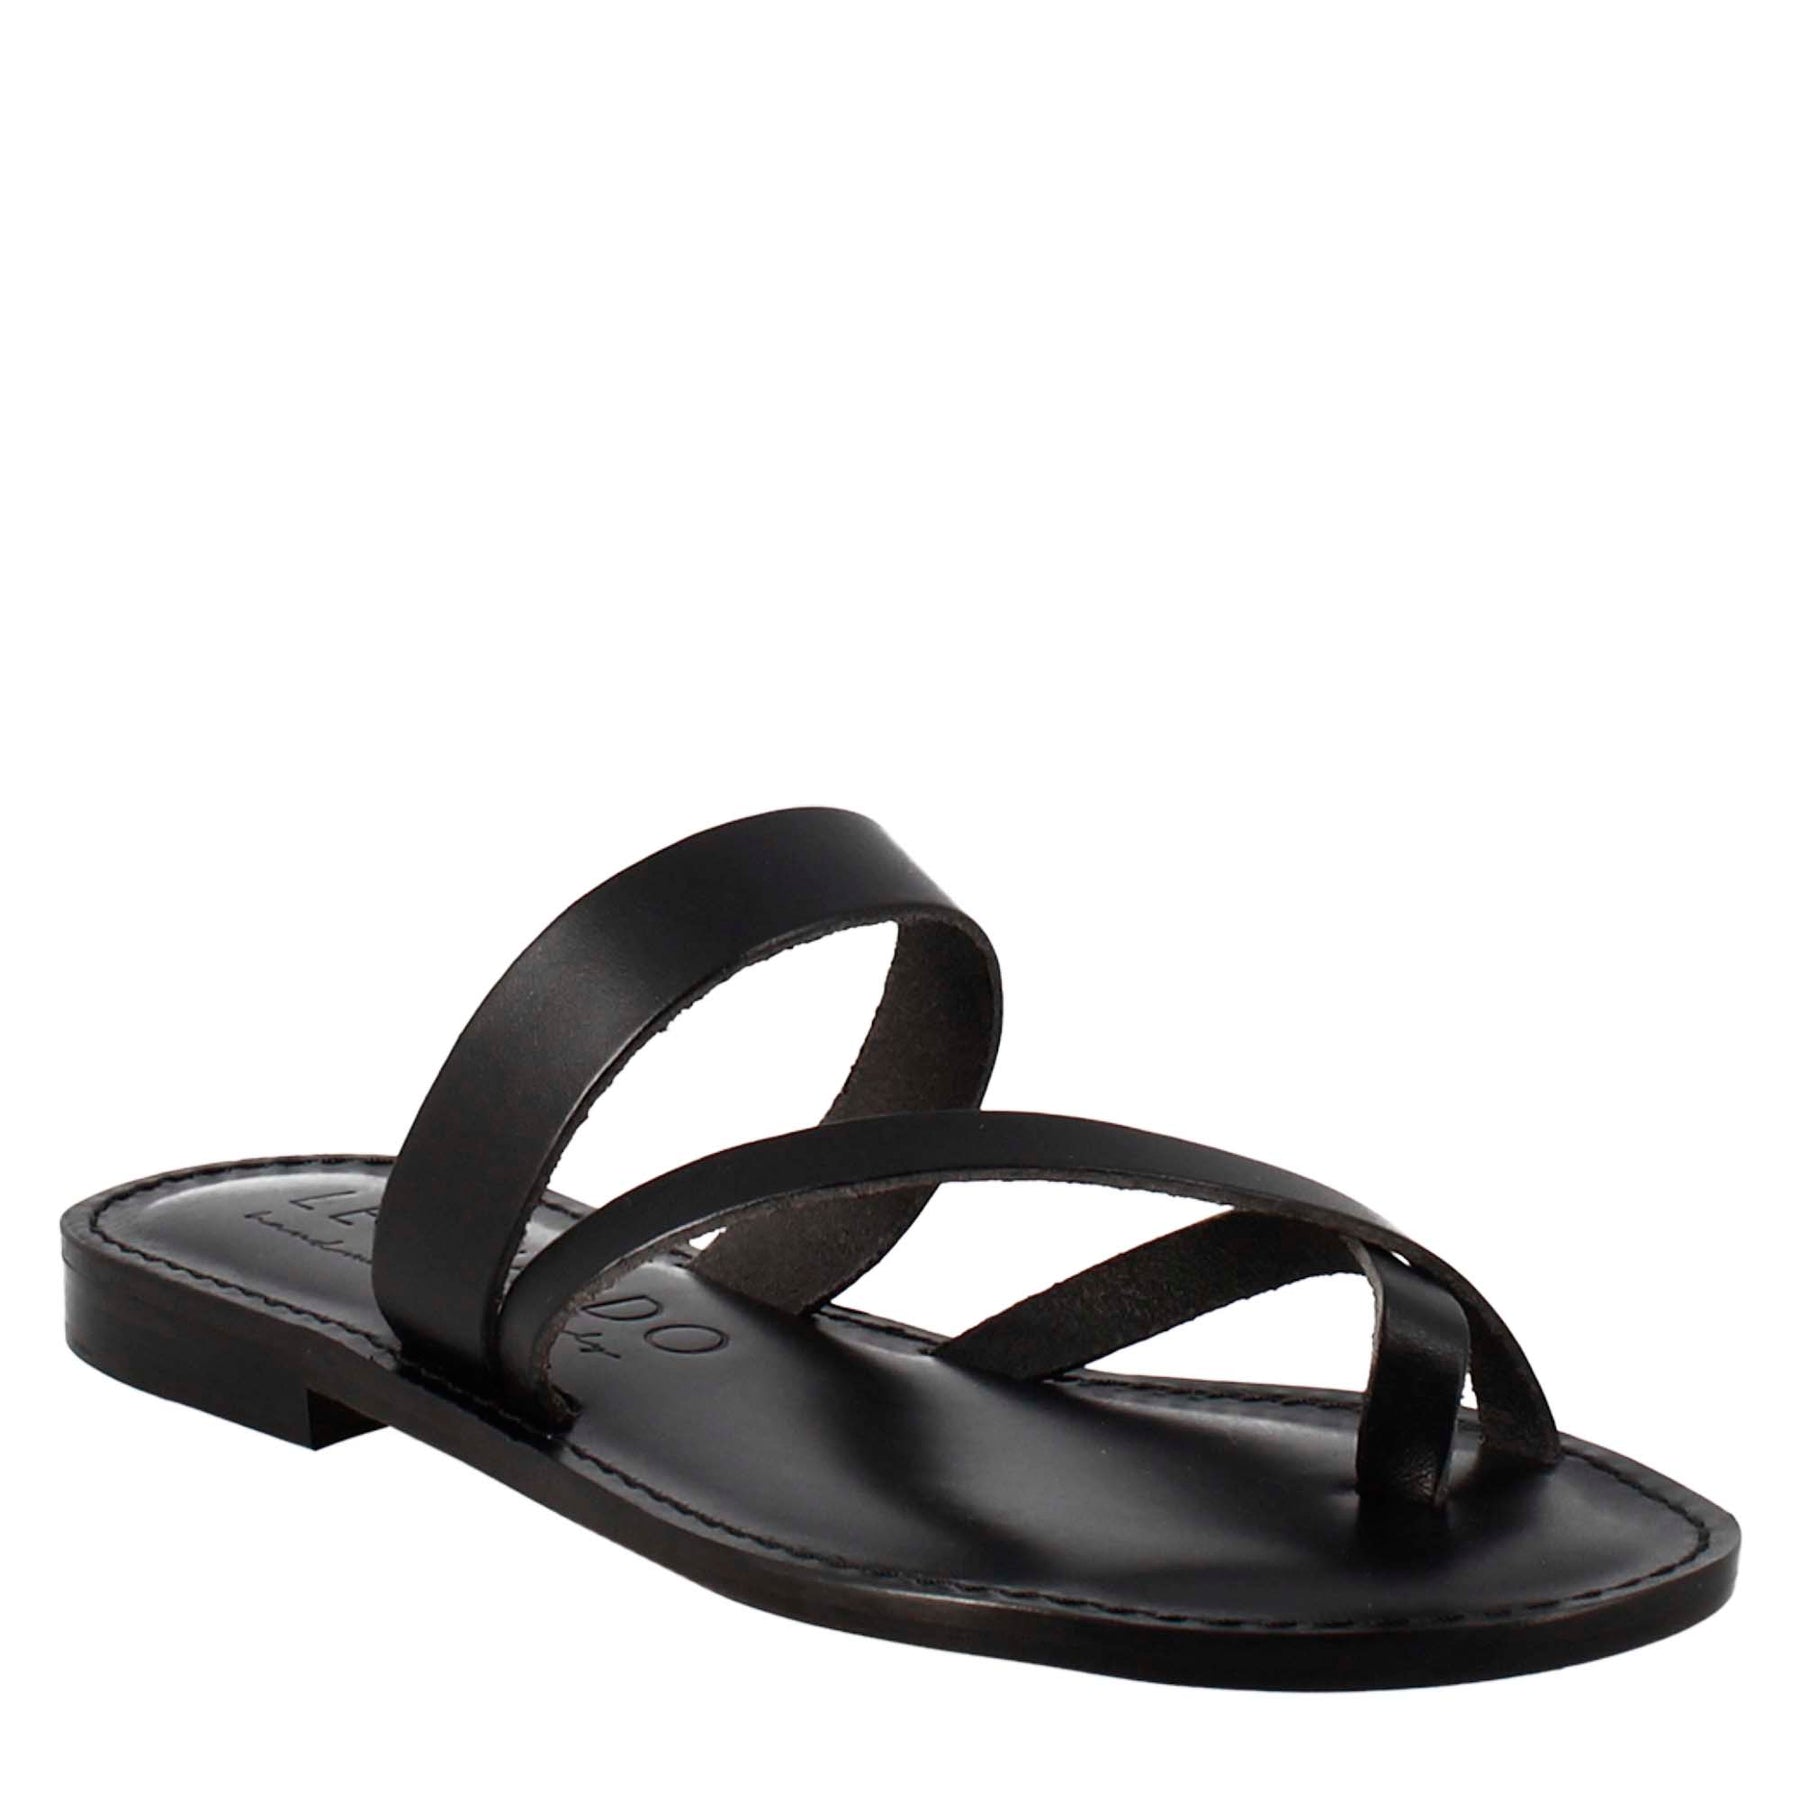 Ancient Roman style Nebula women's sandals in black leather 